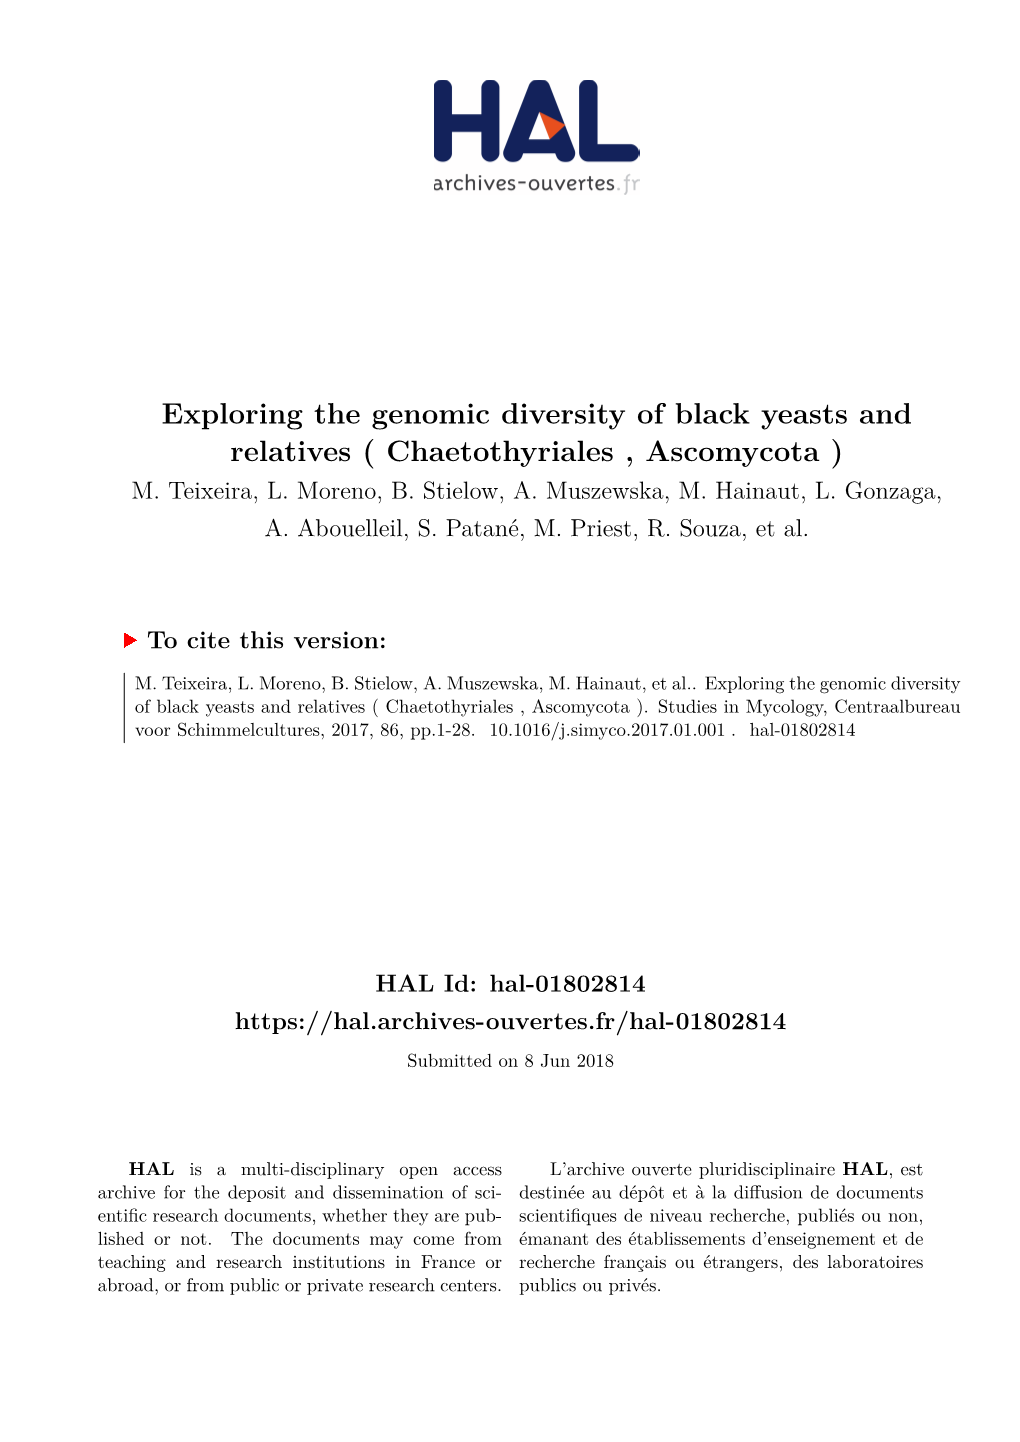 Exploring the Genomic Diversity of Black Yeasts and Relatives ( Chaetothyriales , Ascomycota ) M